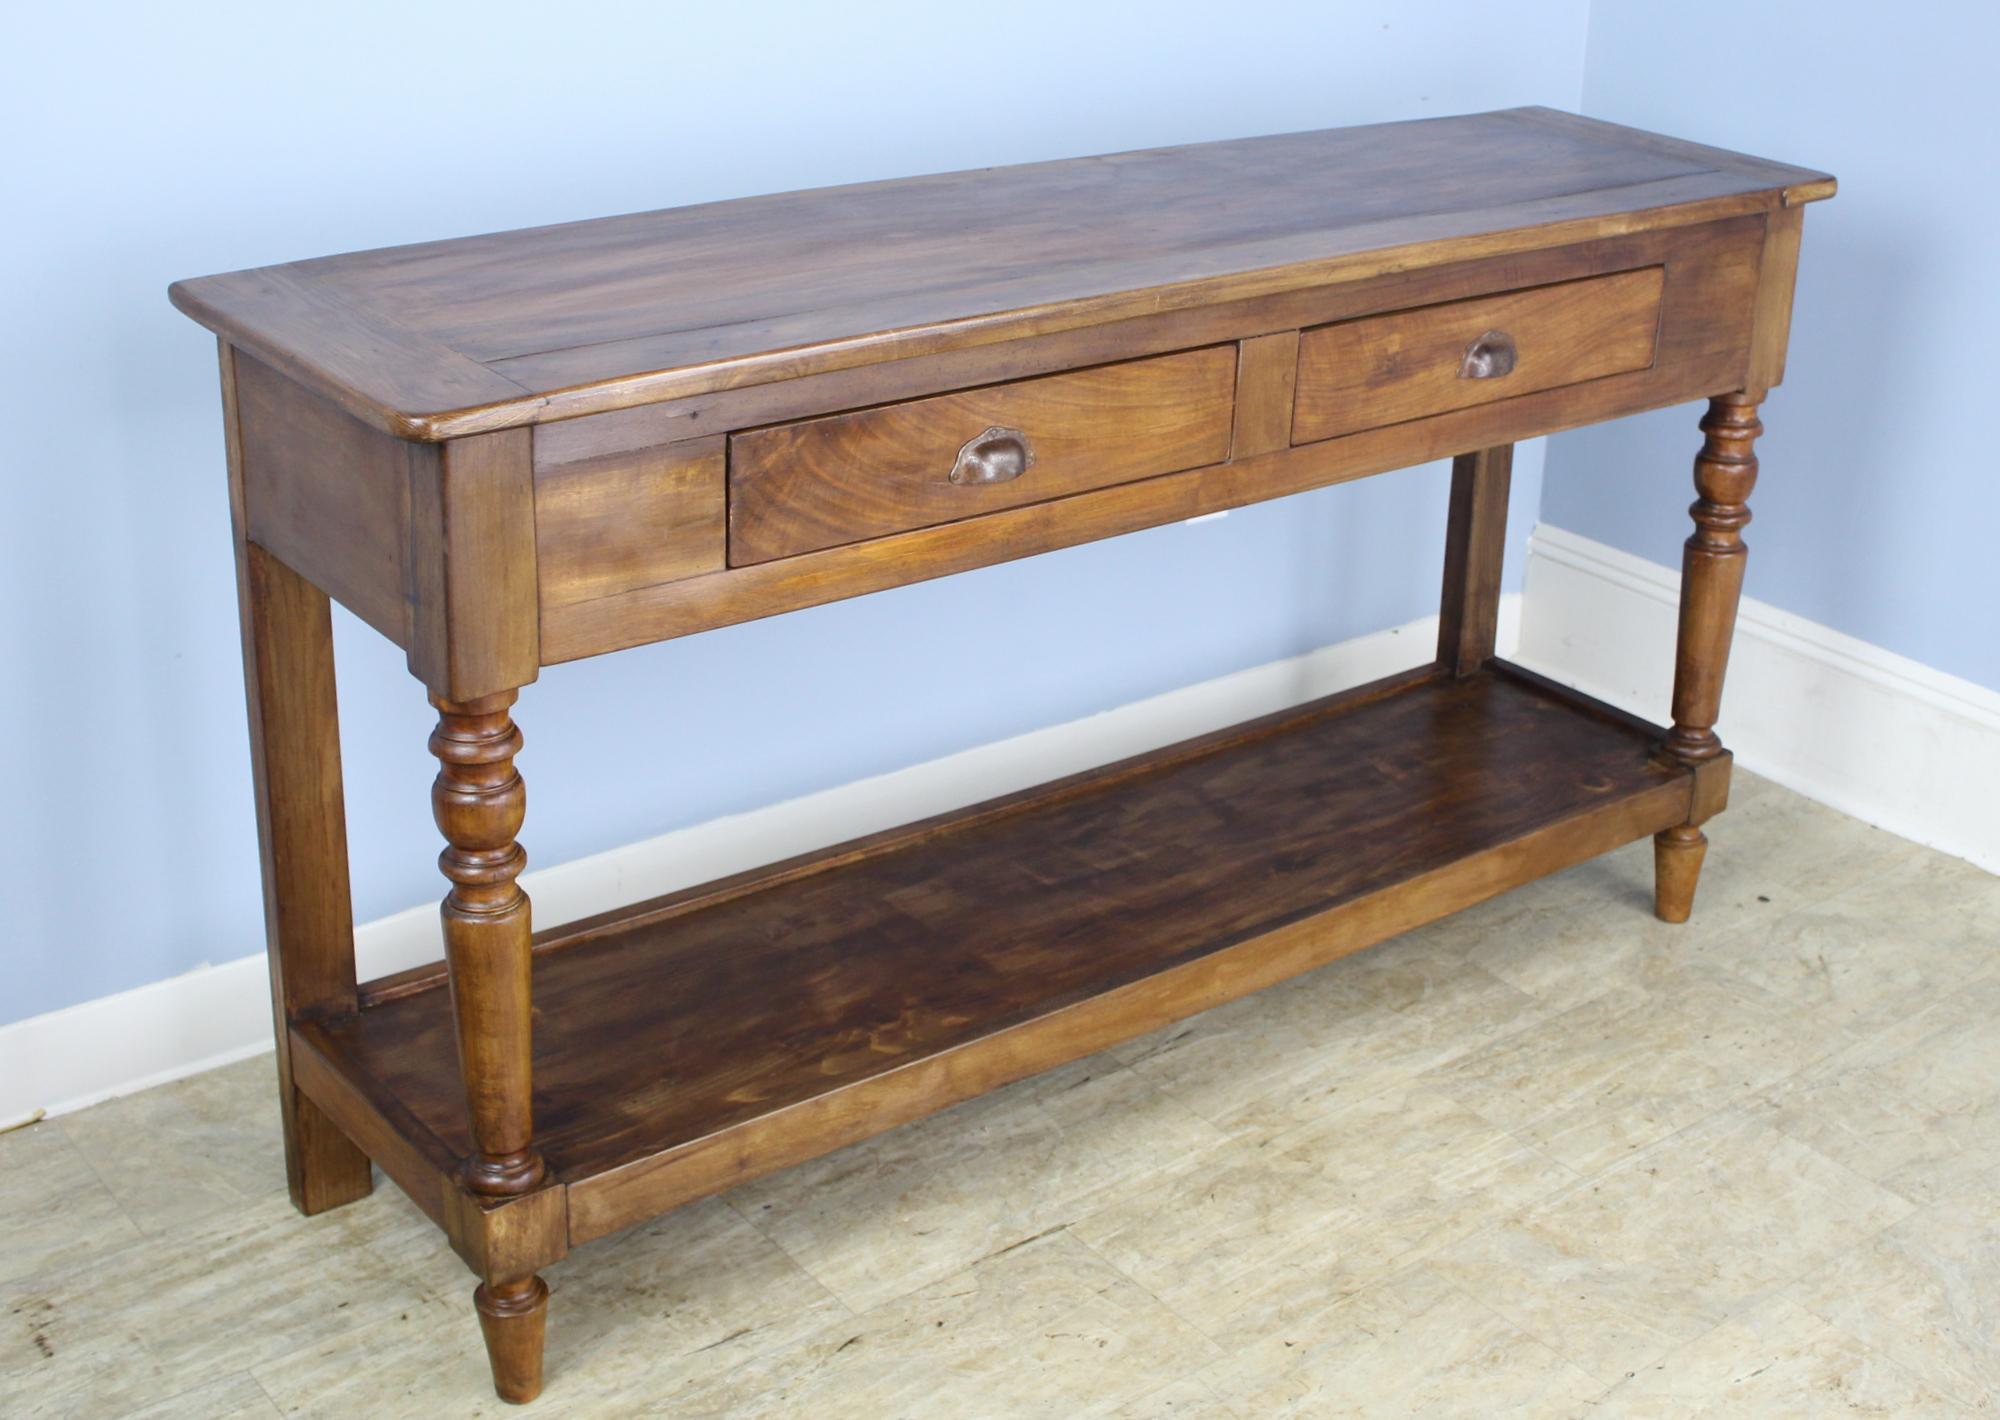 A lovely walnut potboard server, custom made for Briggs House in France with old legs, circa 1850. Generously proportioned with a thick top, two roomy drawers, and vivid walnut color.